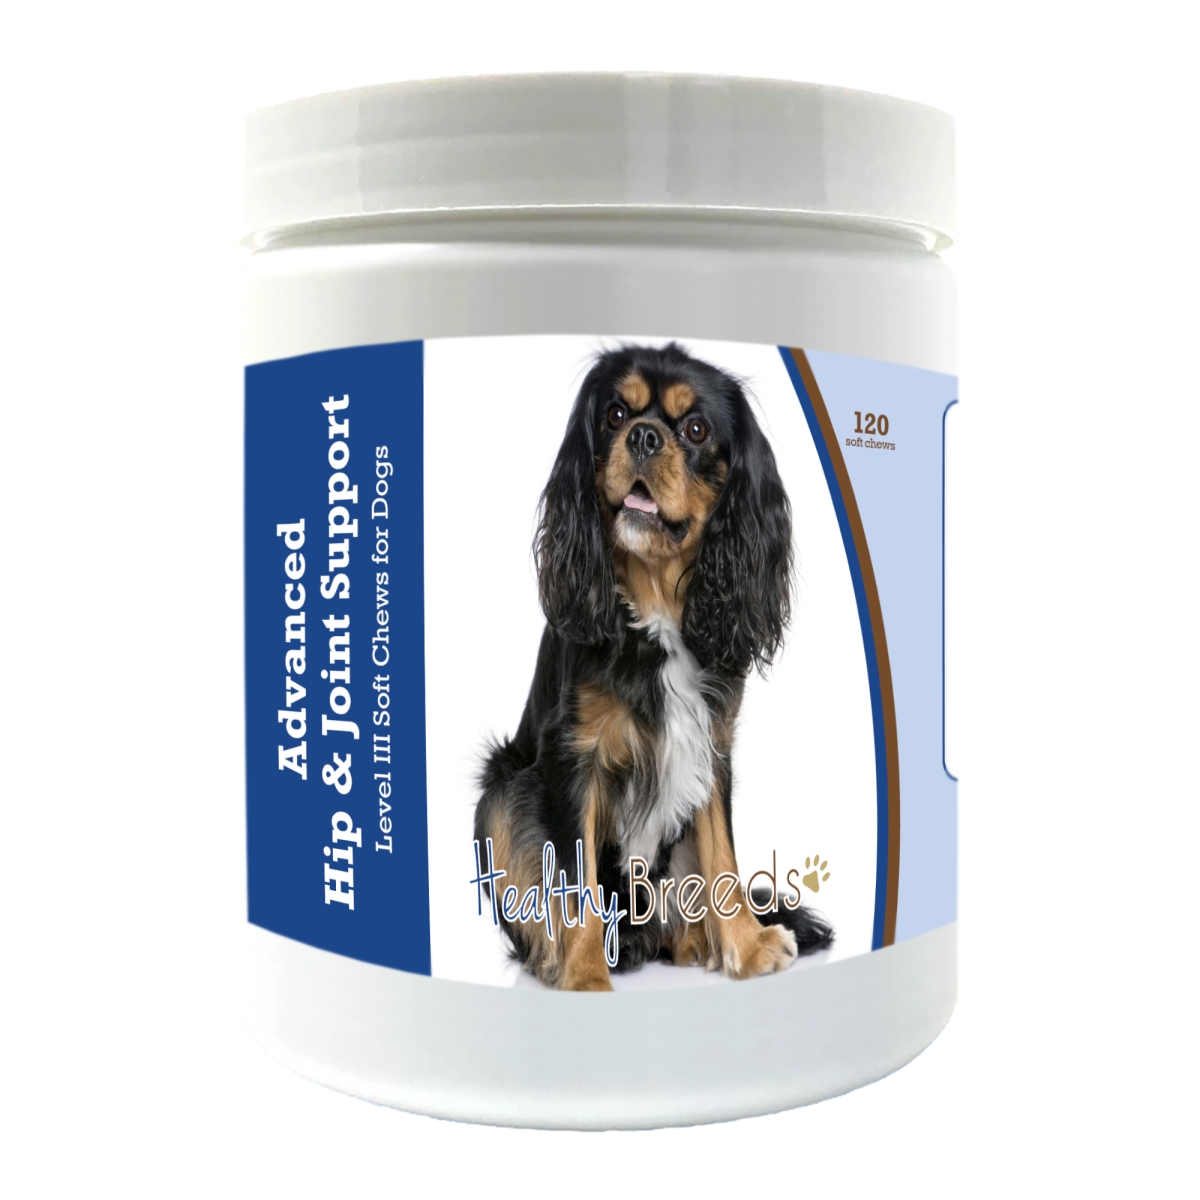 Picture of Healthy Breeds 192959897876 Cavalier King Charles Spaniel Advanced Hip & Joint Support Level III Soft Chews for Dogs